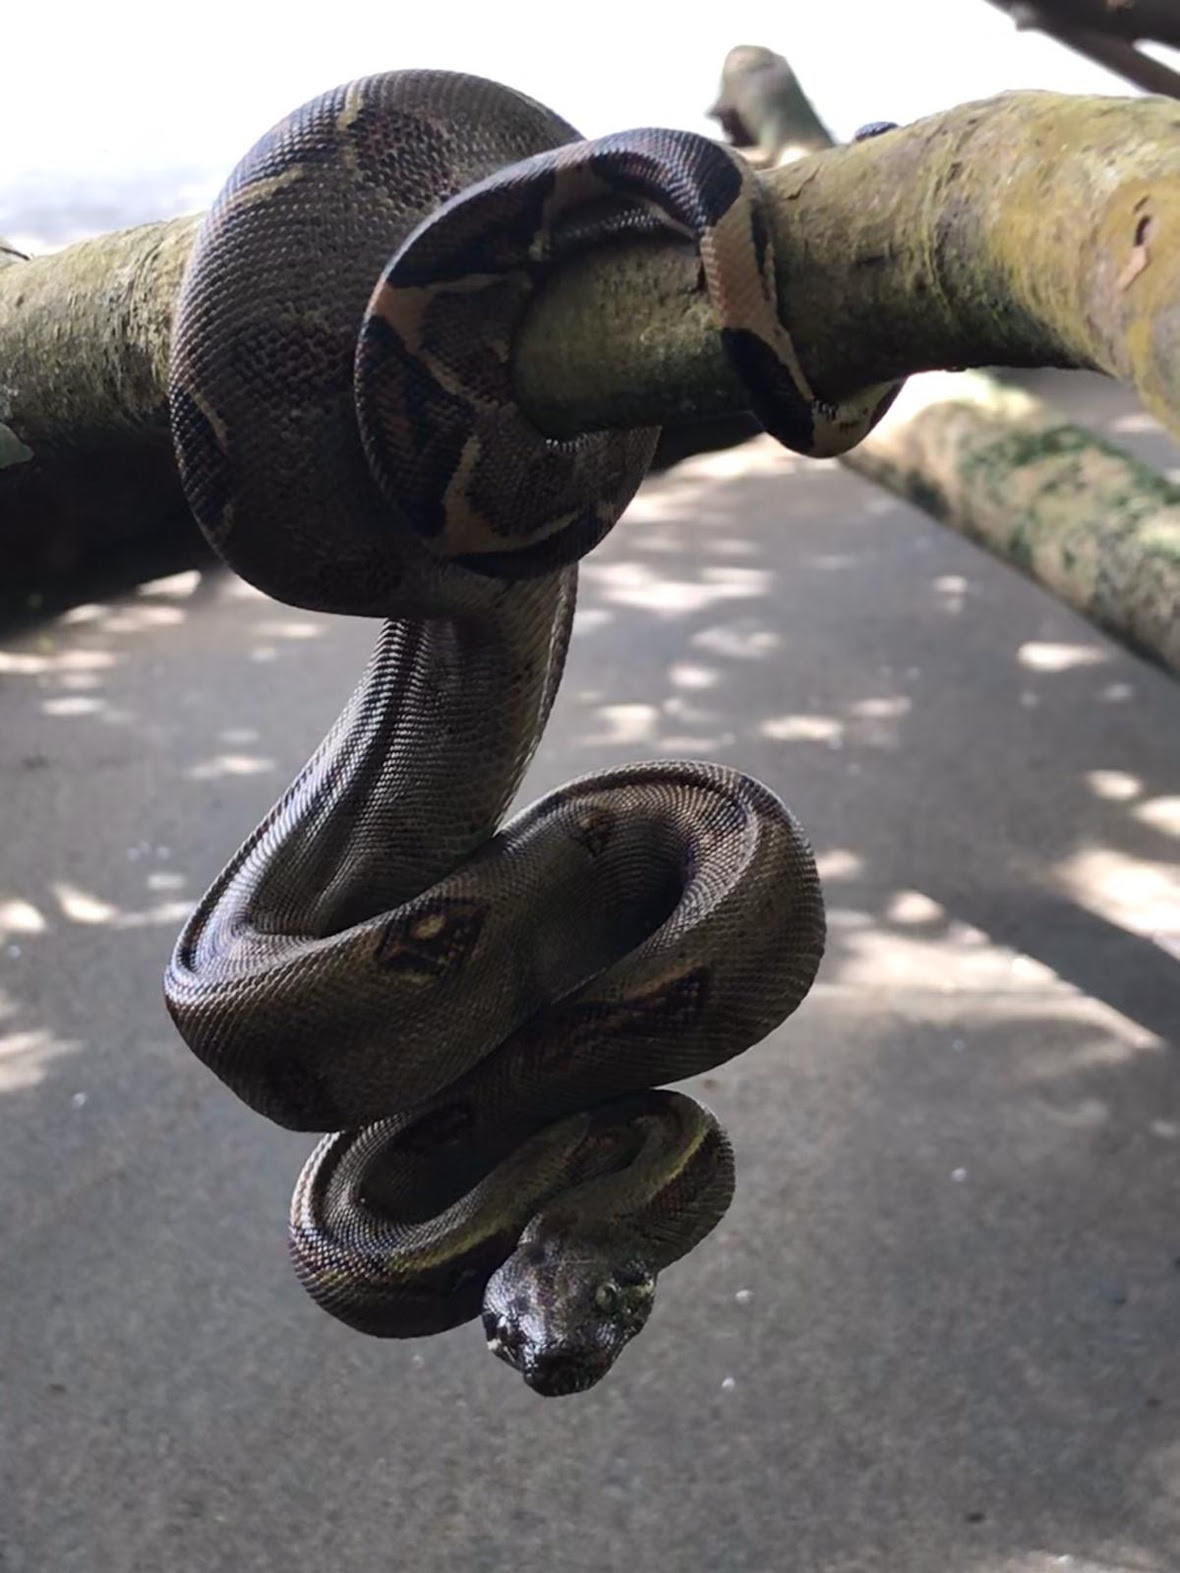 Boa constrictor wrapped around branch and hanging down